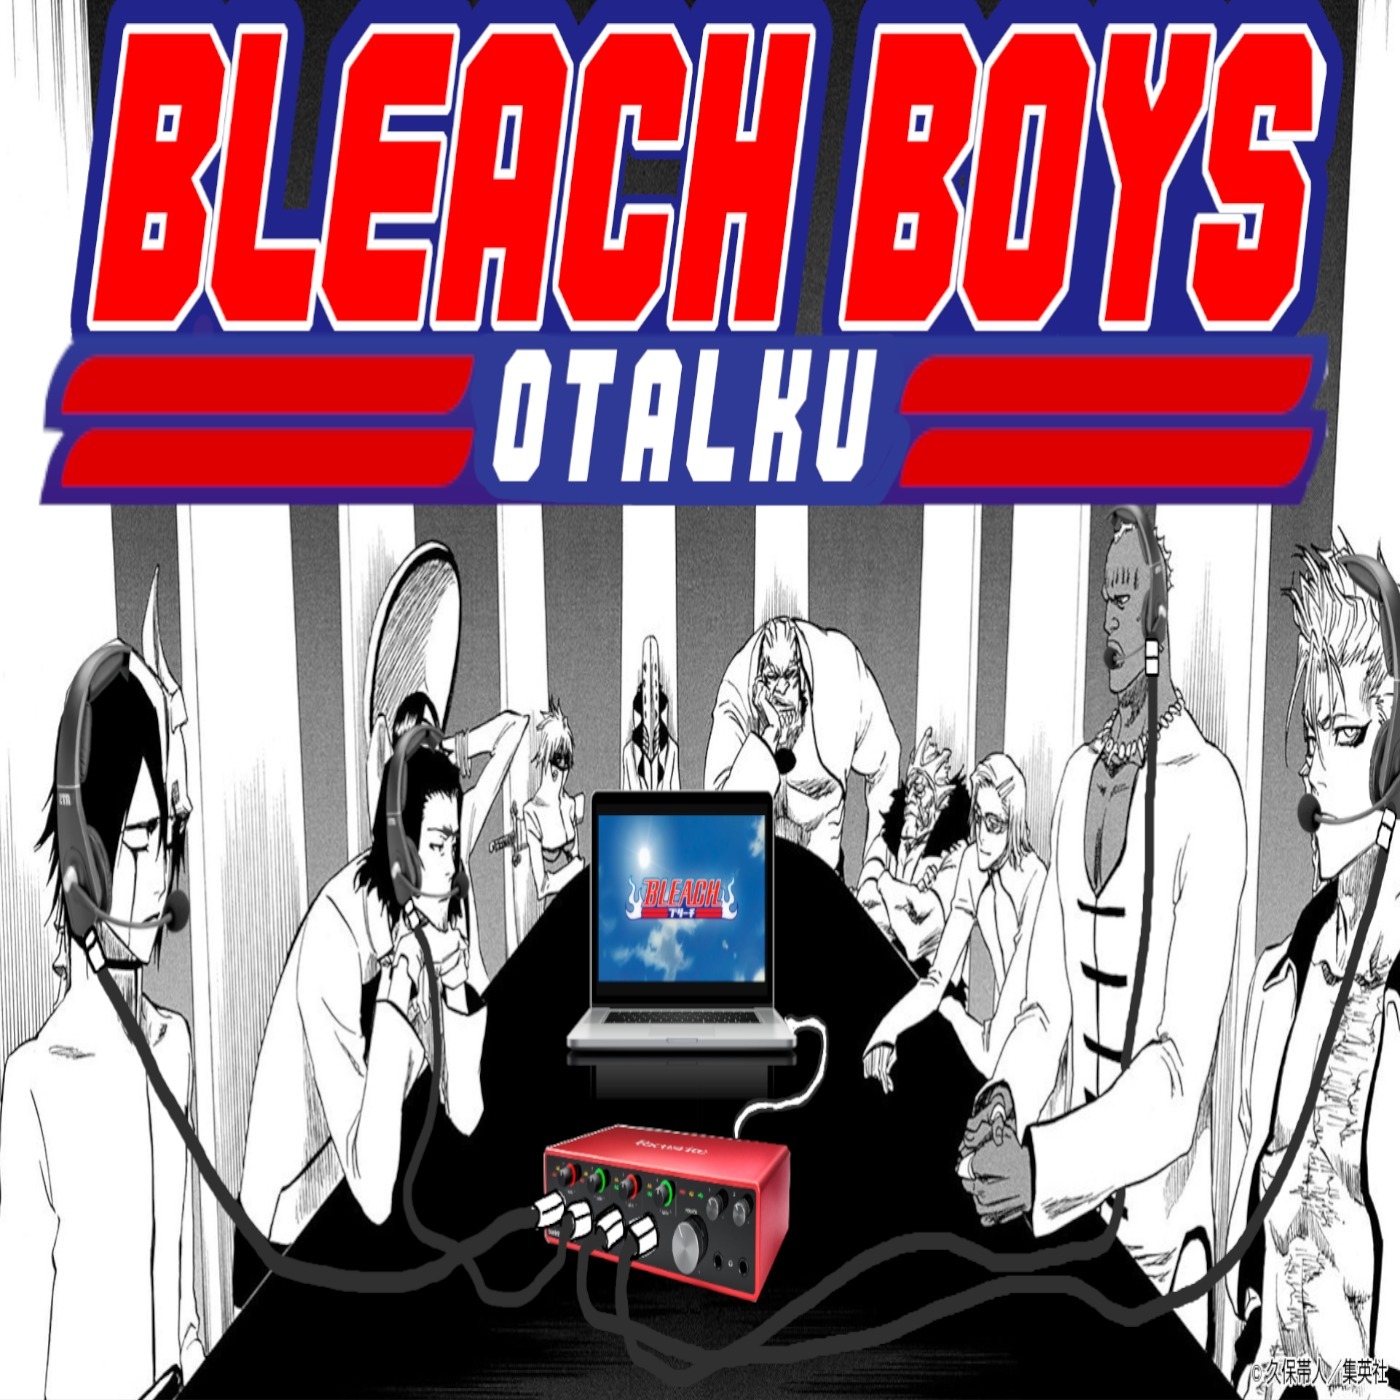 Bleach TYBW episode 16: Toshiro vs Bazz B commences as Bankai are returned